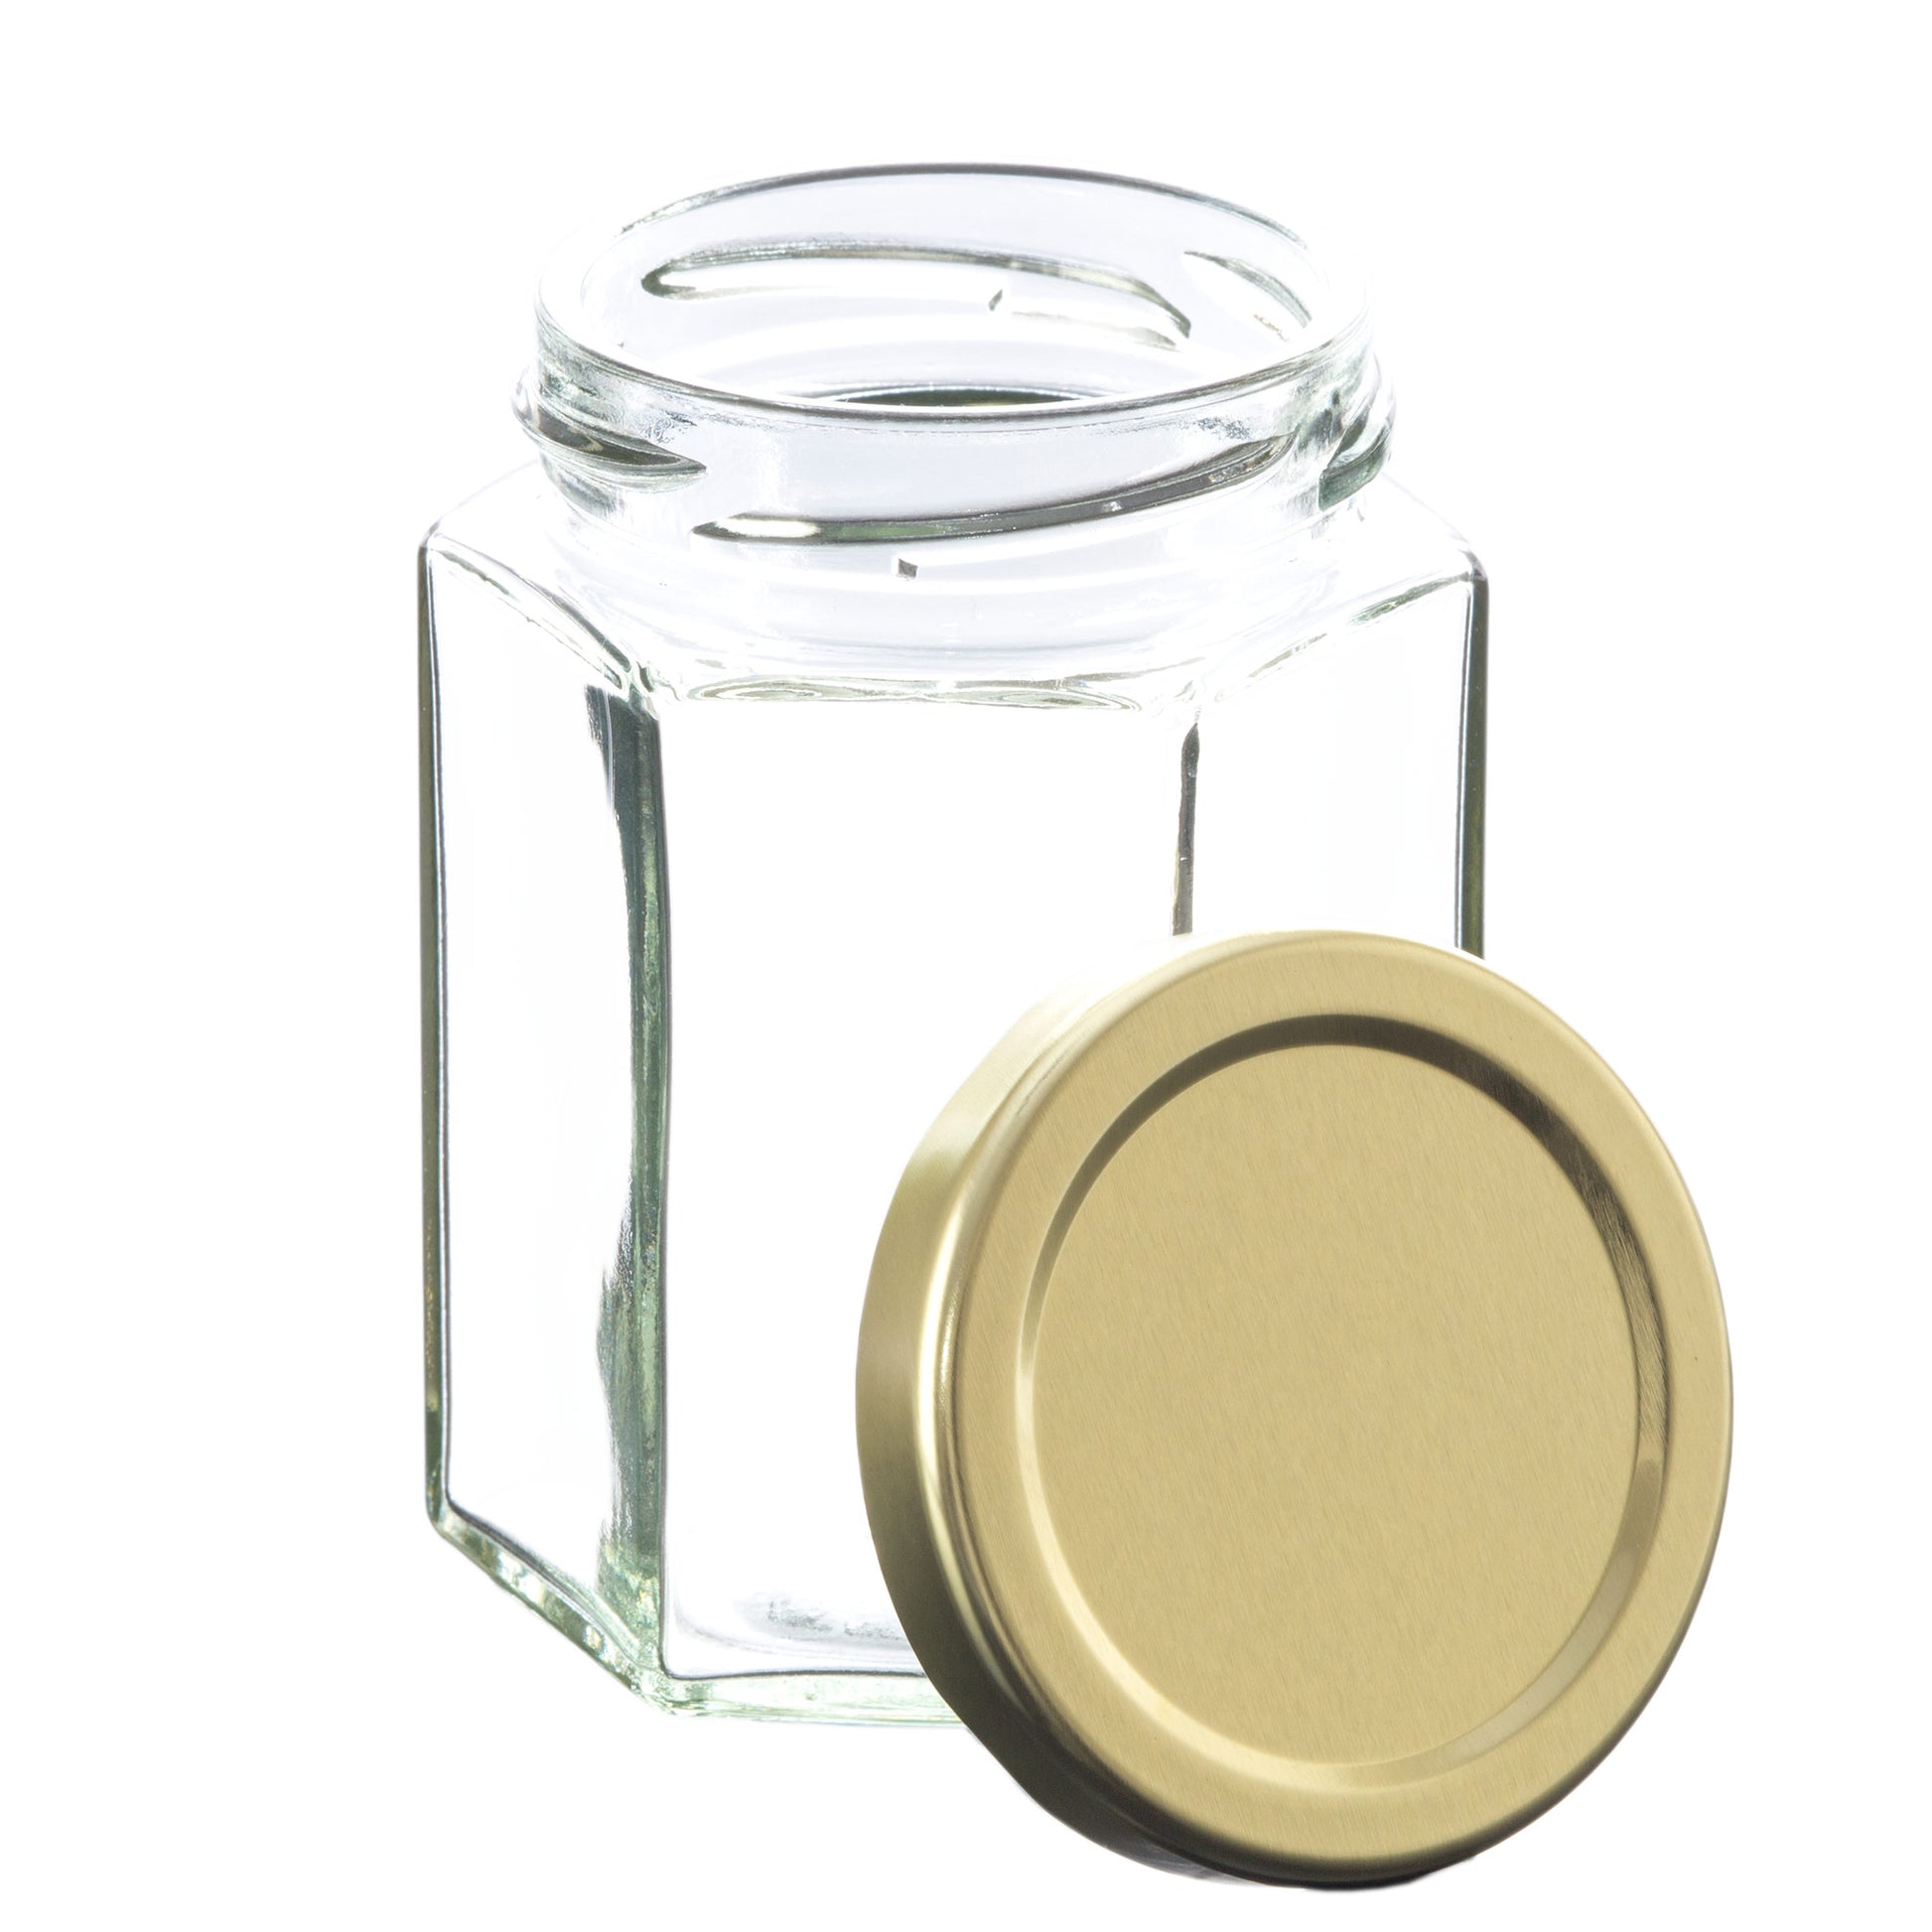 Hexagon Jars Gold Lid (15pcs, 6.0 oz) Hexagon Glass Jars with Gold  Plastisol Lined Lids for